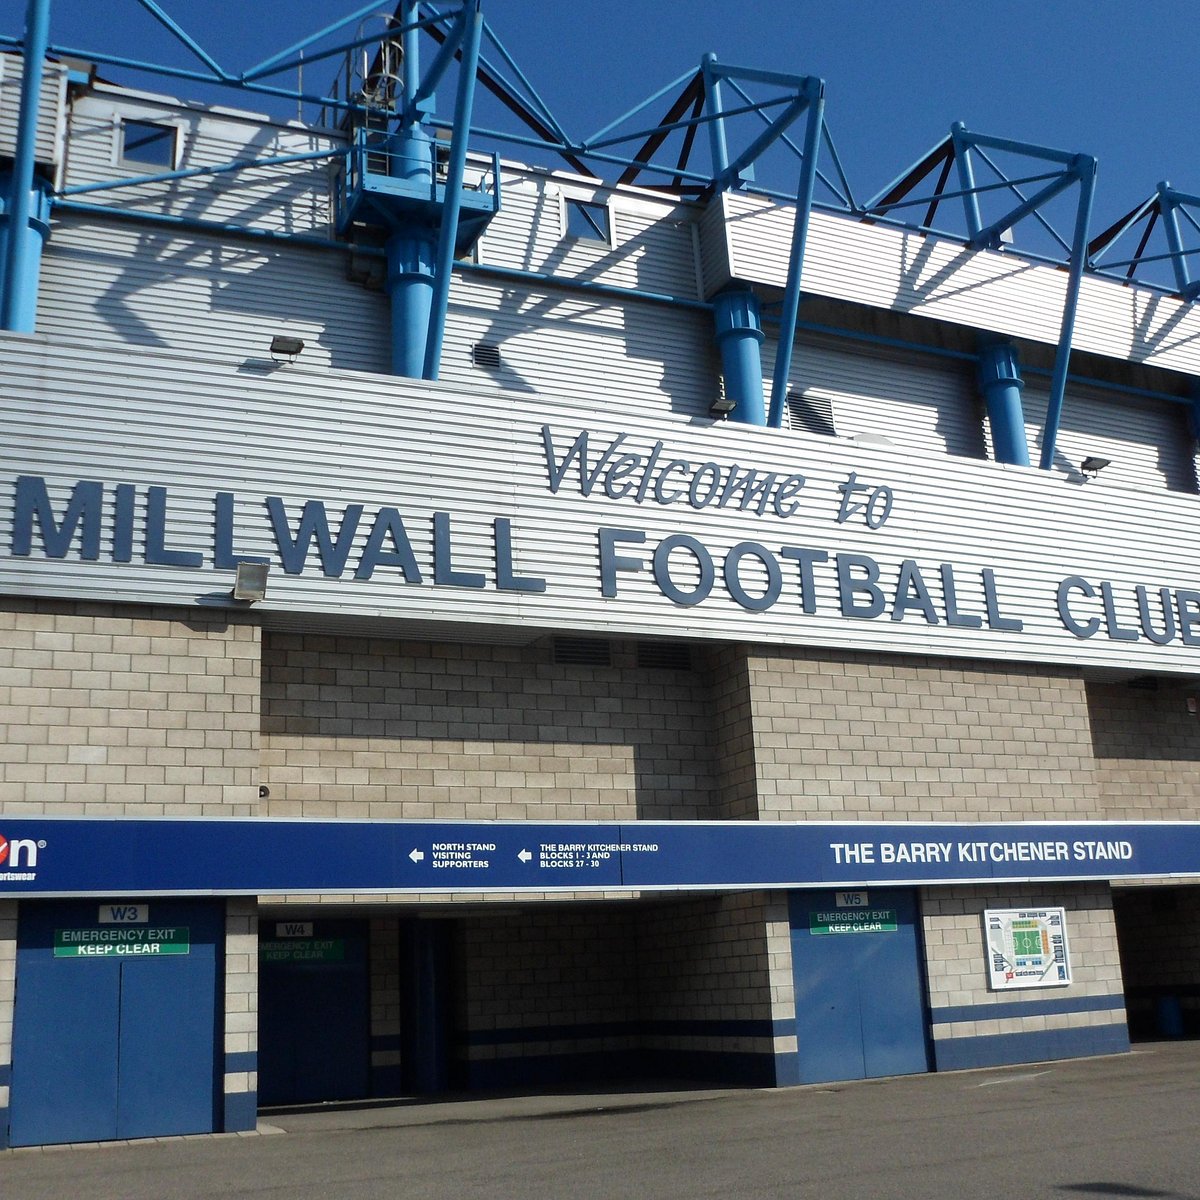 Millwall Overview